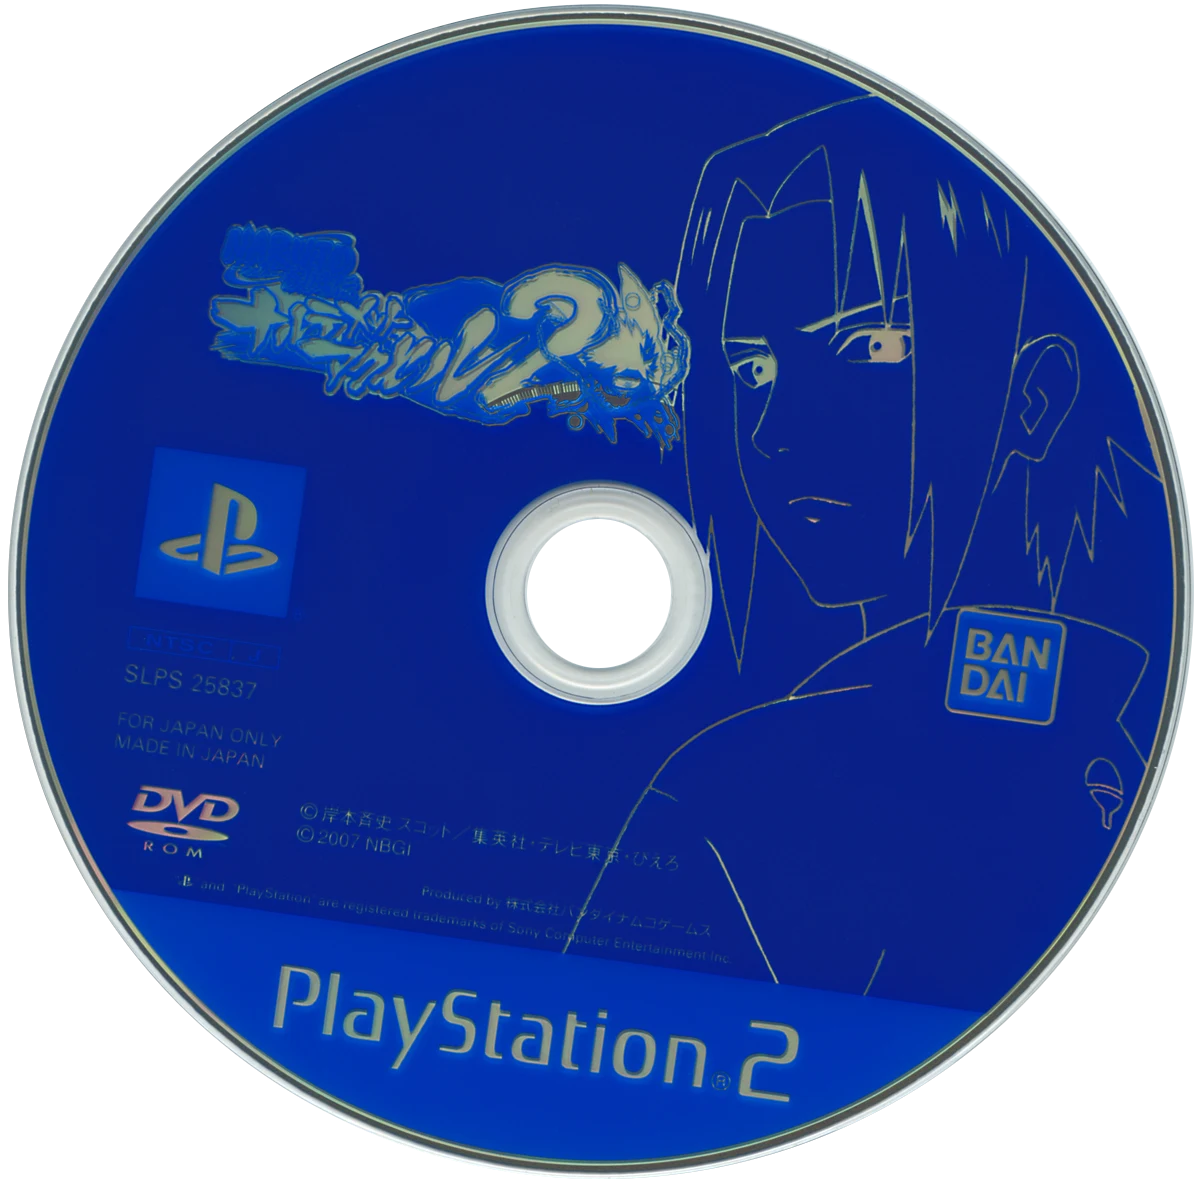 Naruto Shippuden - Ultimate Ninja 5 ROM (ISO) Download for Sony Playstation  2 / PS2 